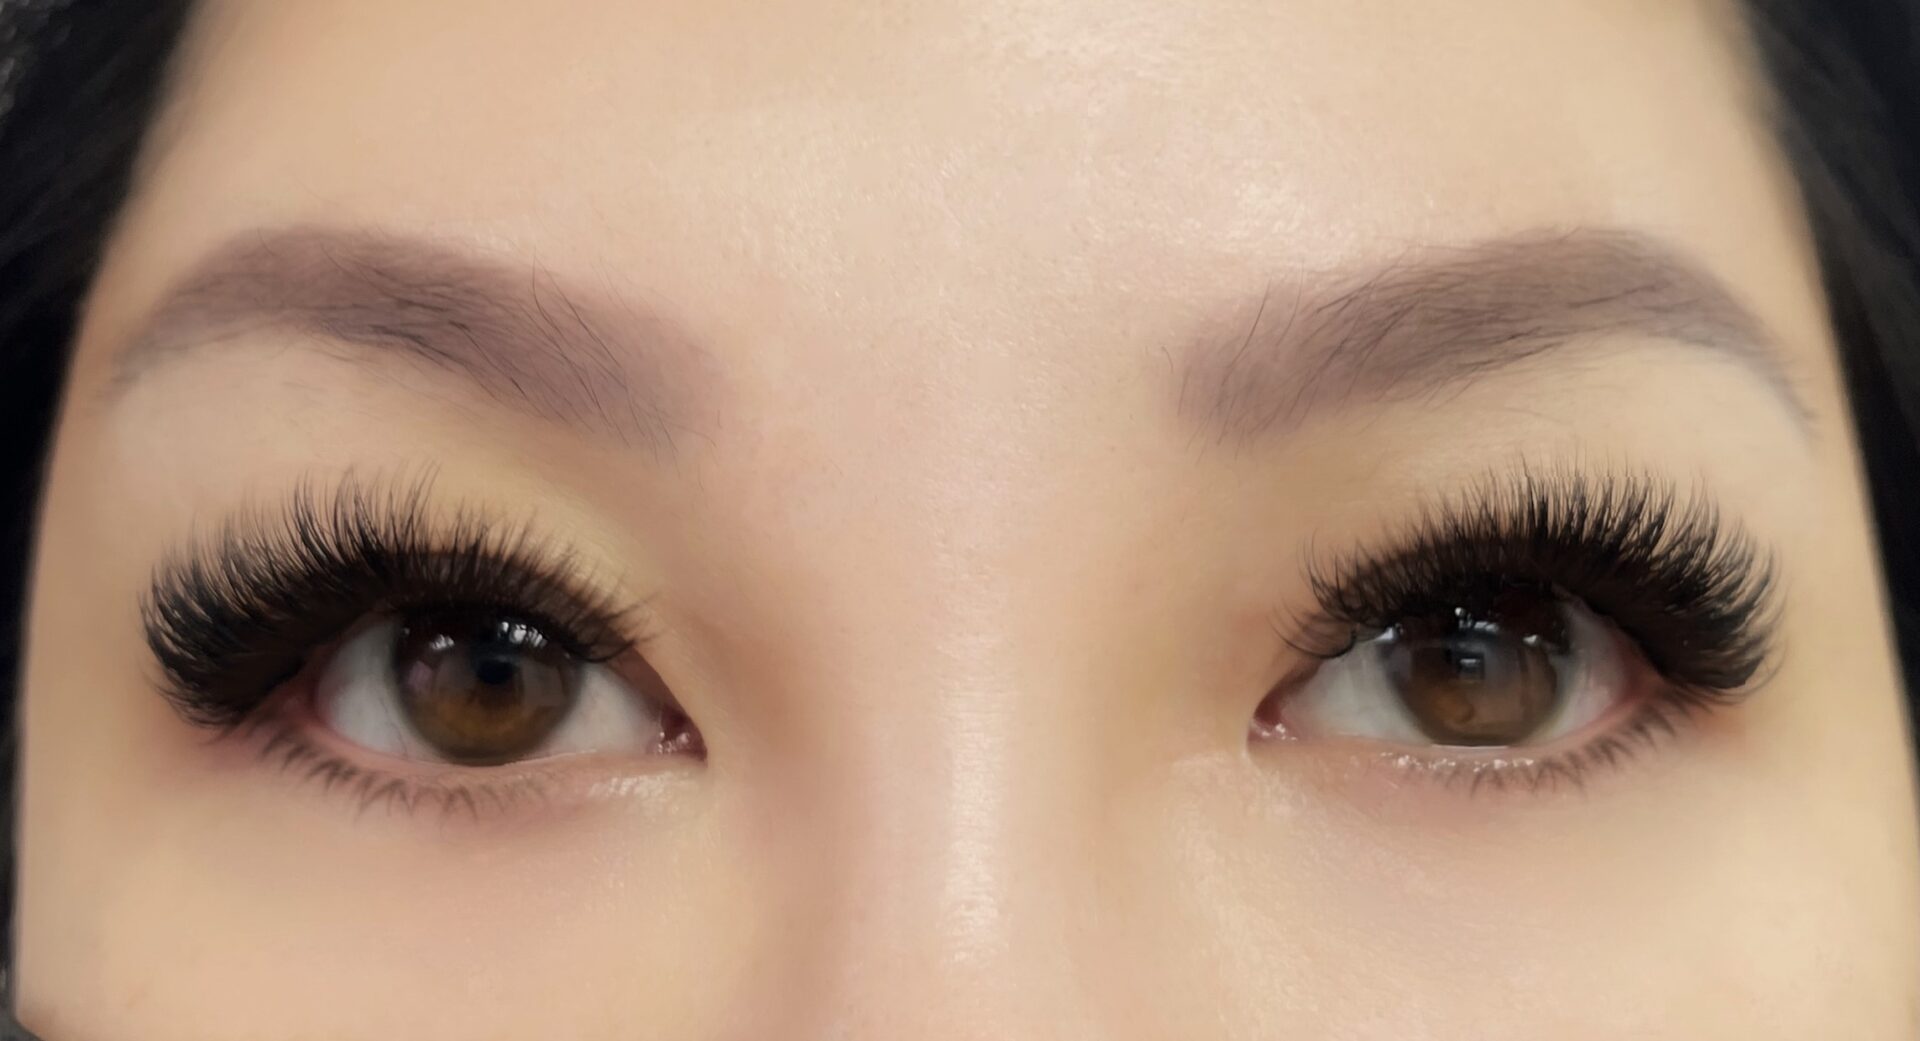 A close up of the eyes with long eyelashes